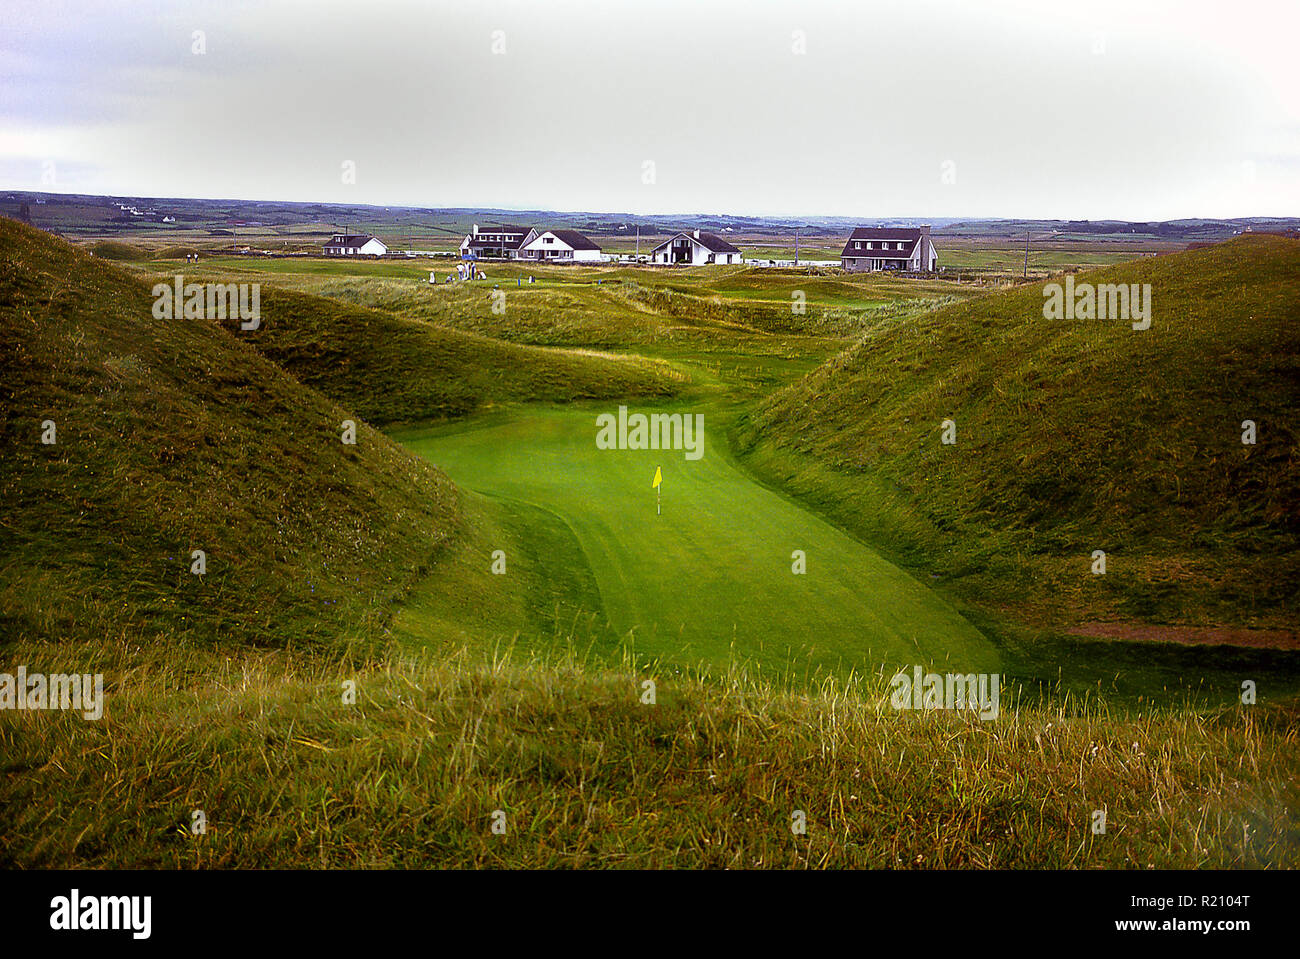 5th Hole a par three called The Dell, at Lahinch Golf Club, Ireland venue for the 2019 Irish Open on the PGA European Tour Stock Photo